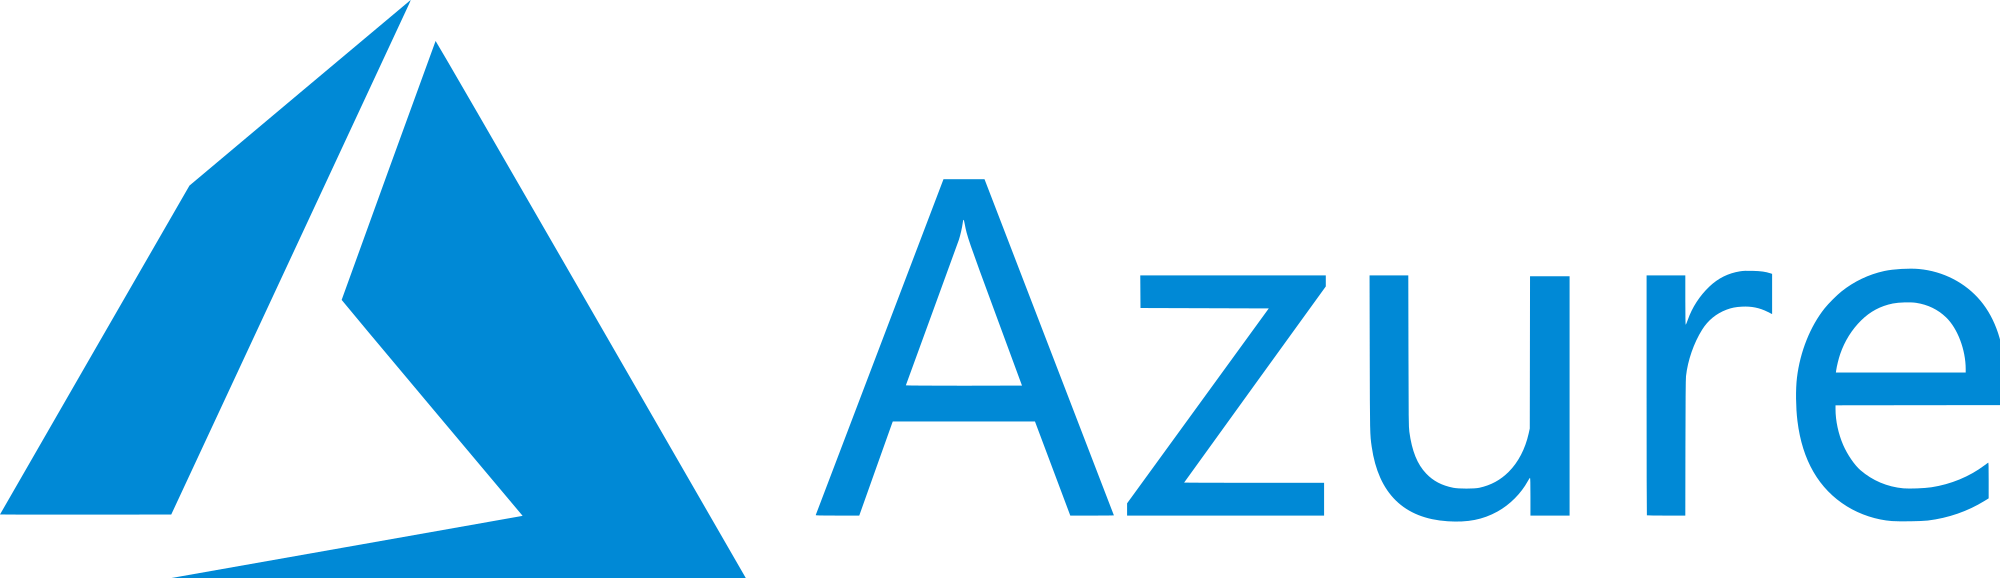 Benefits Of Hosting Your Atlassian Suite With Contegix - Microsoft Azure Logo Png (2000x578), Png Download